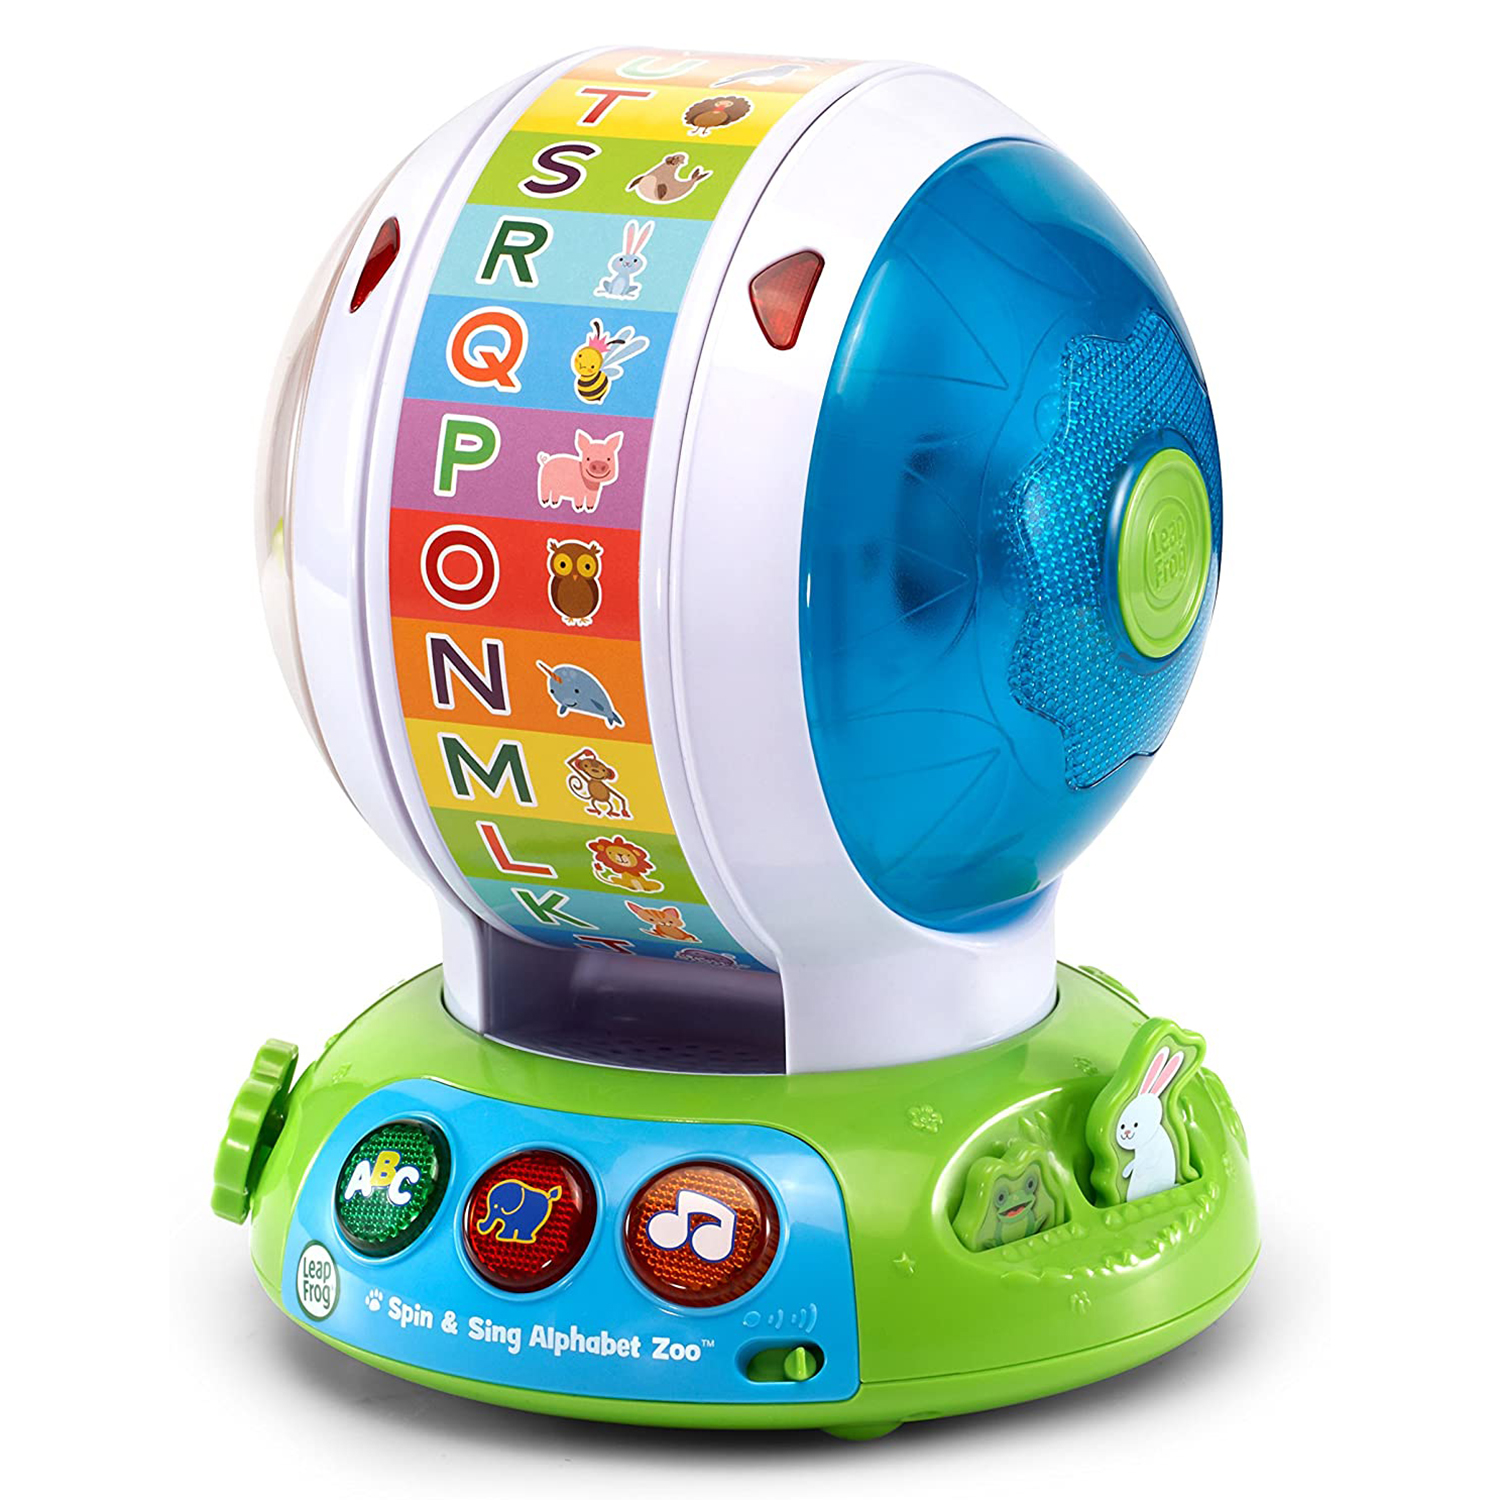 Best Educational BabyToy: LeapFrog Spin and Sing Alphabet Zoo